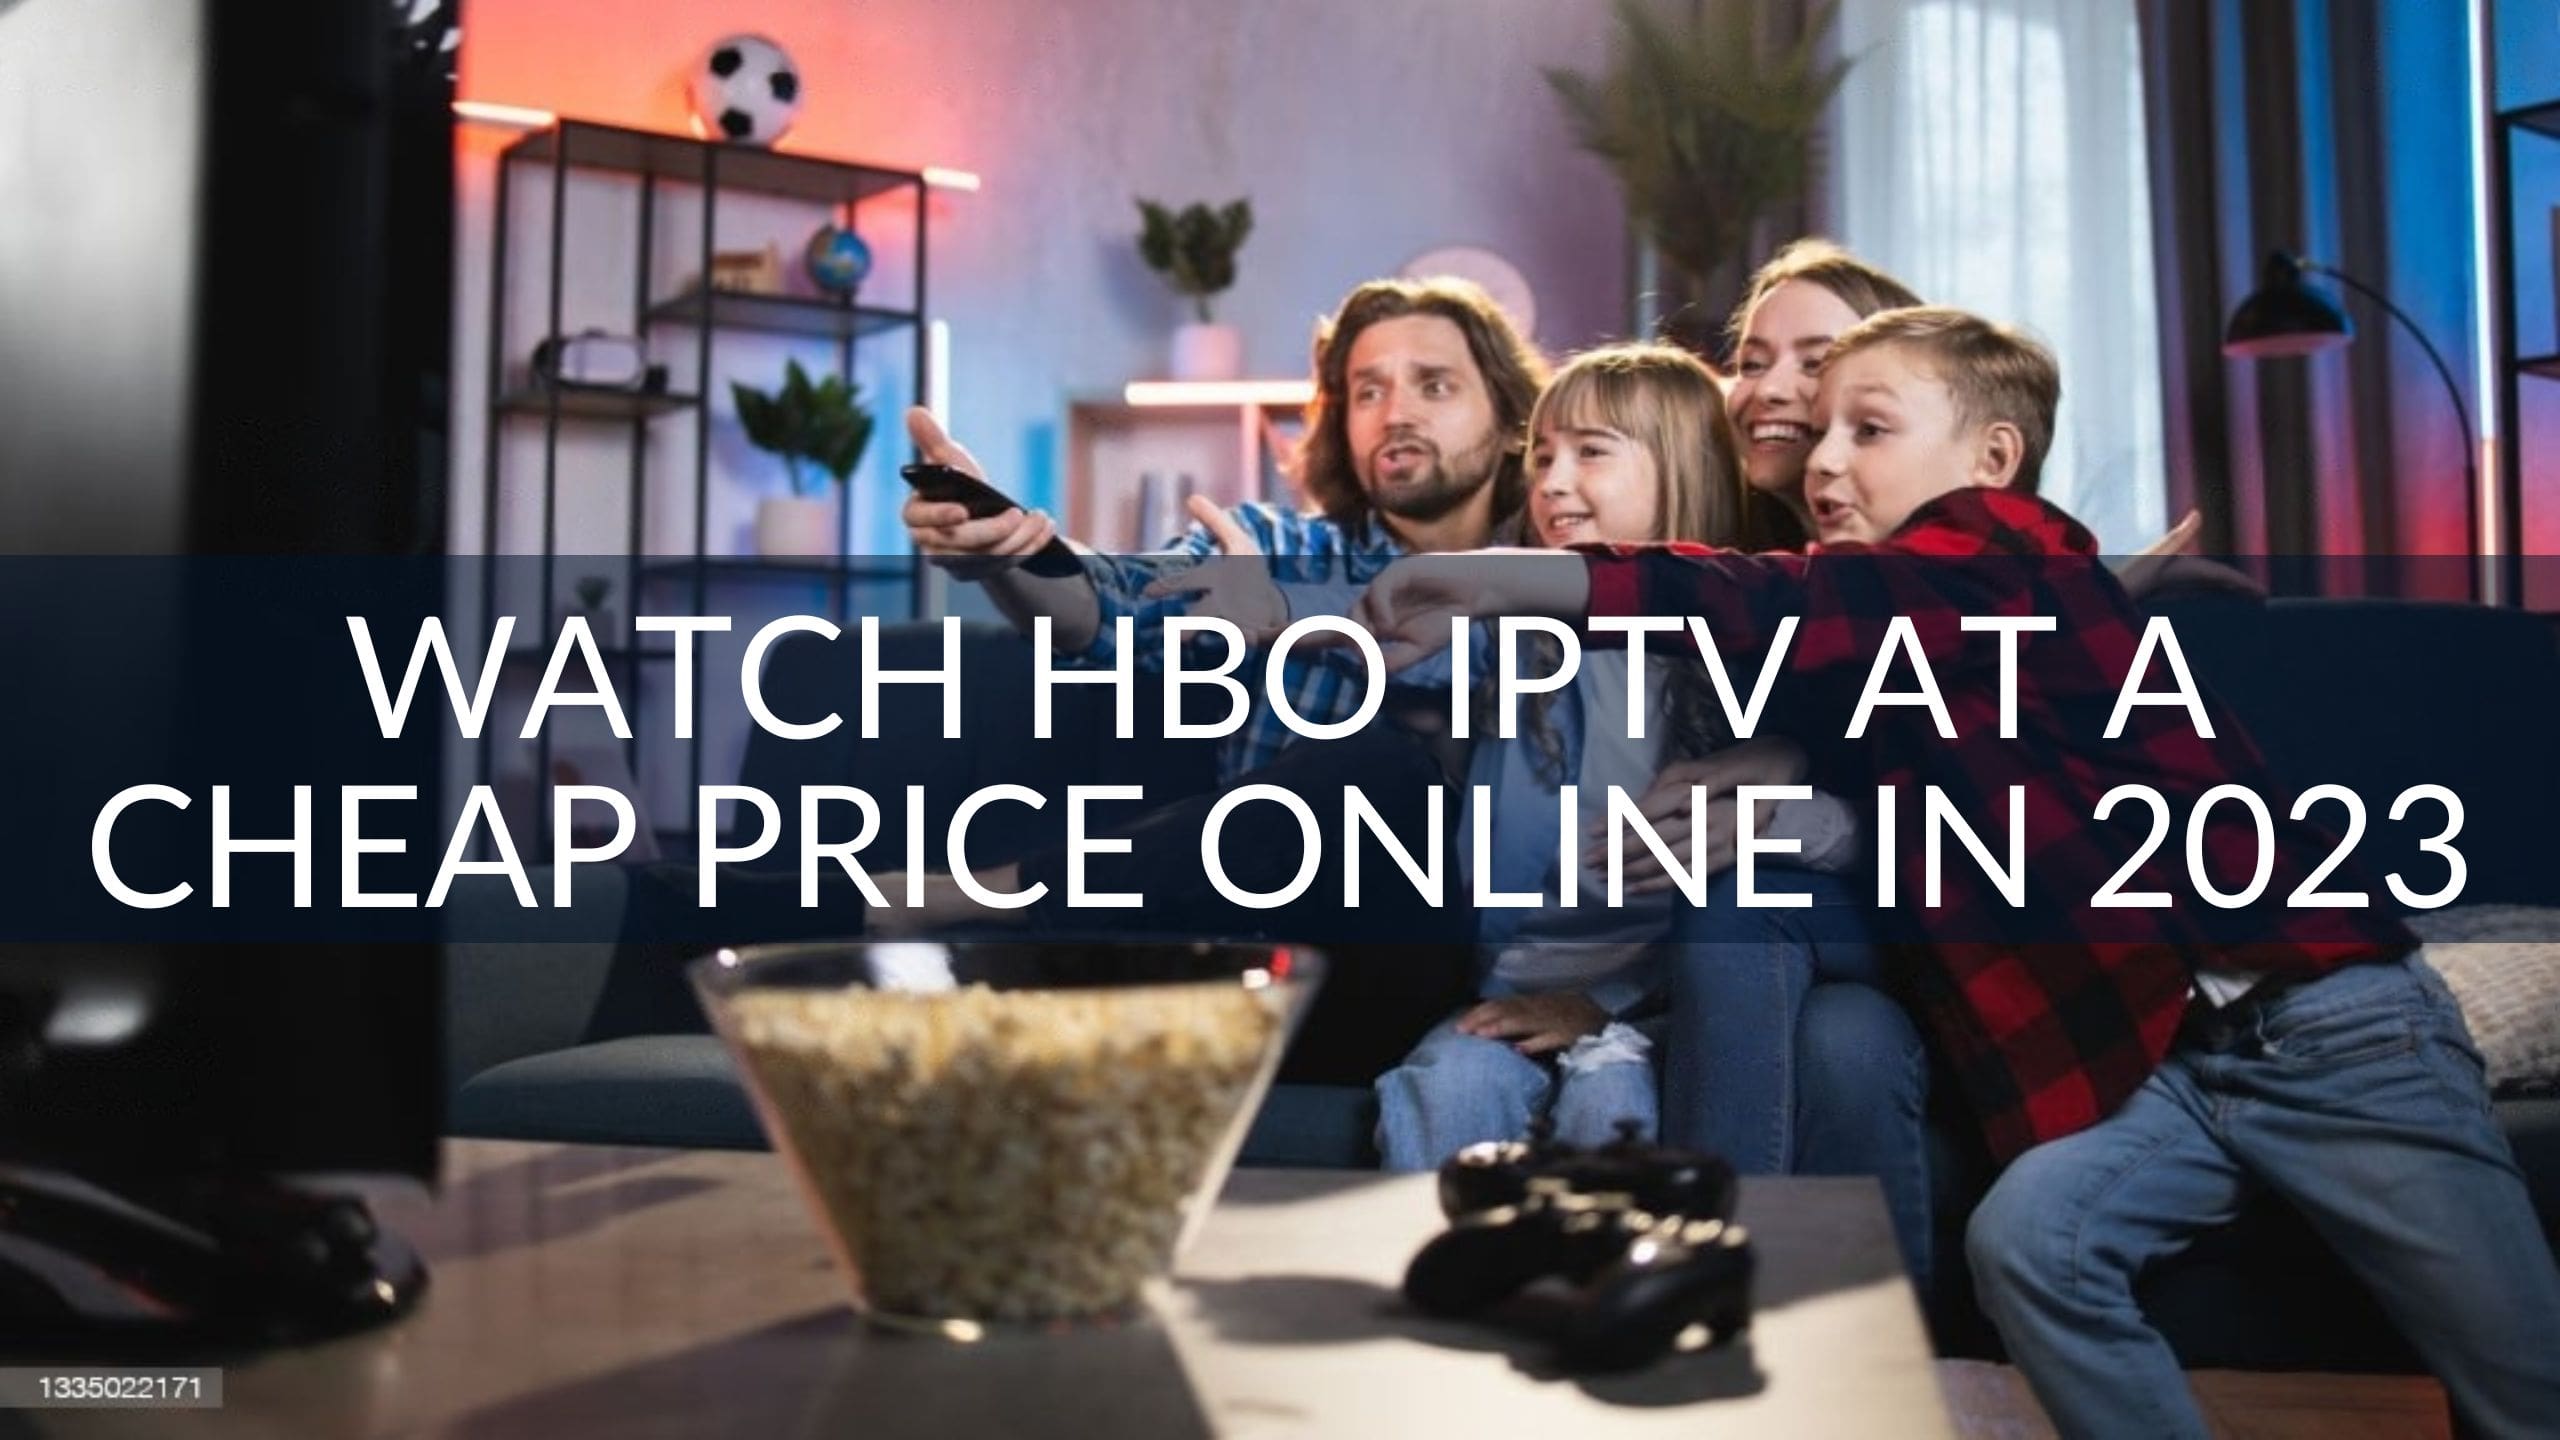 Watch HBO IPTV at a Cheap Price Online in 2023